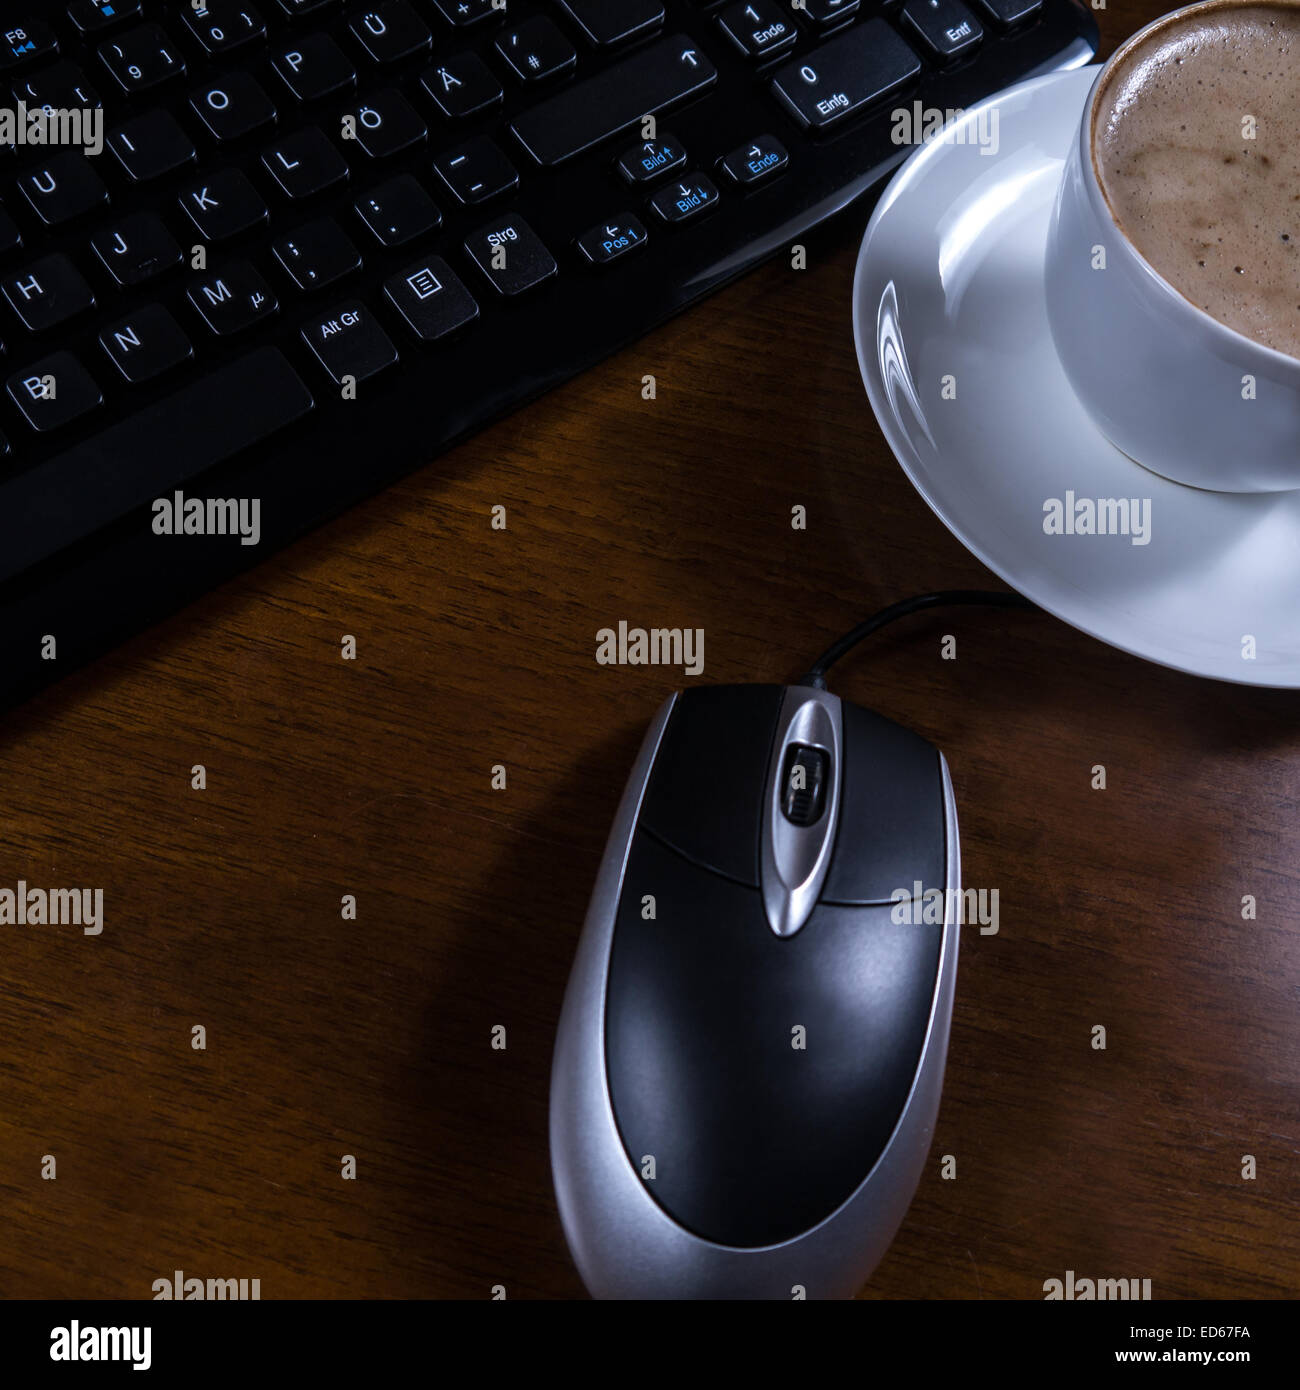 keyboard, cup coffee and mouse on desk Stock Photo